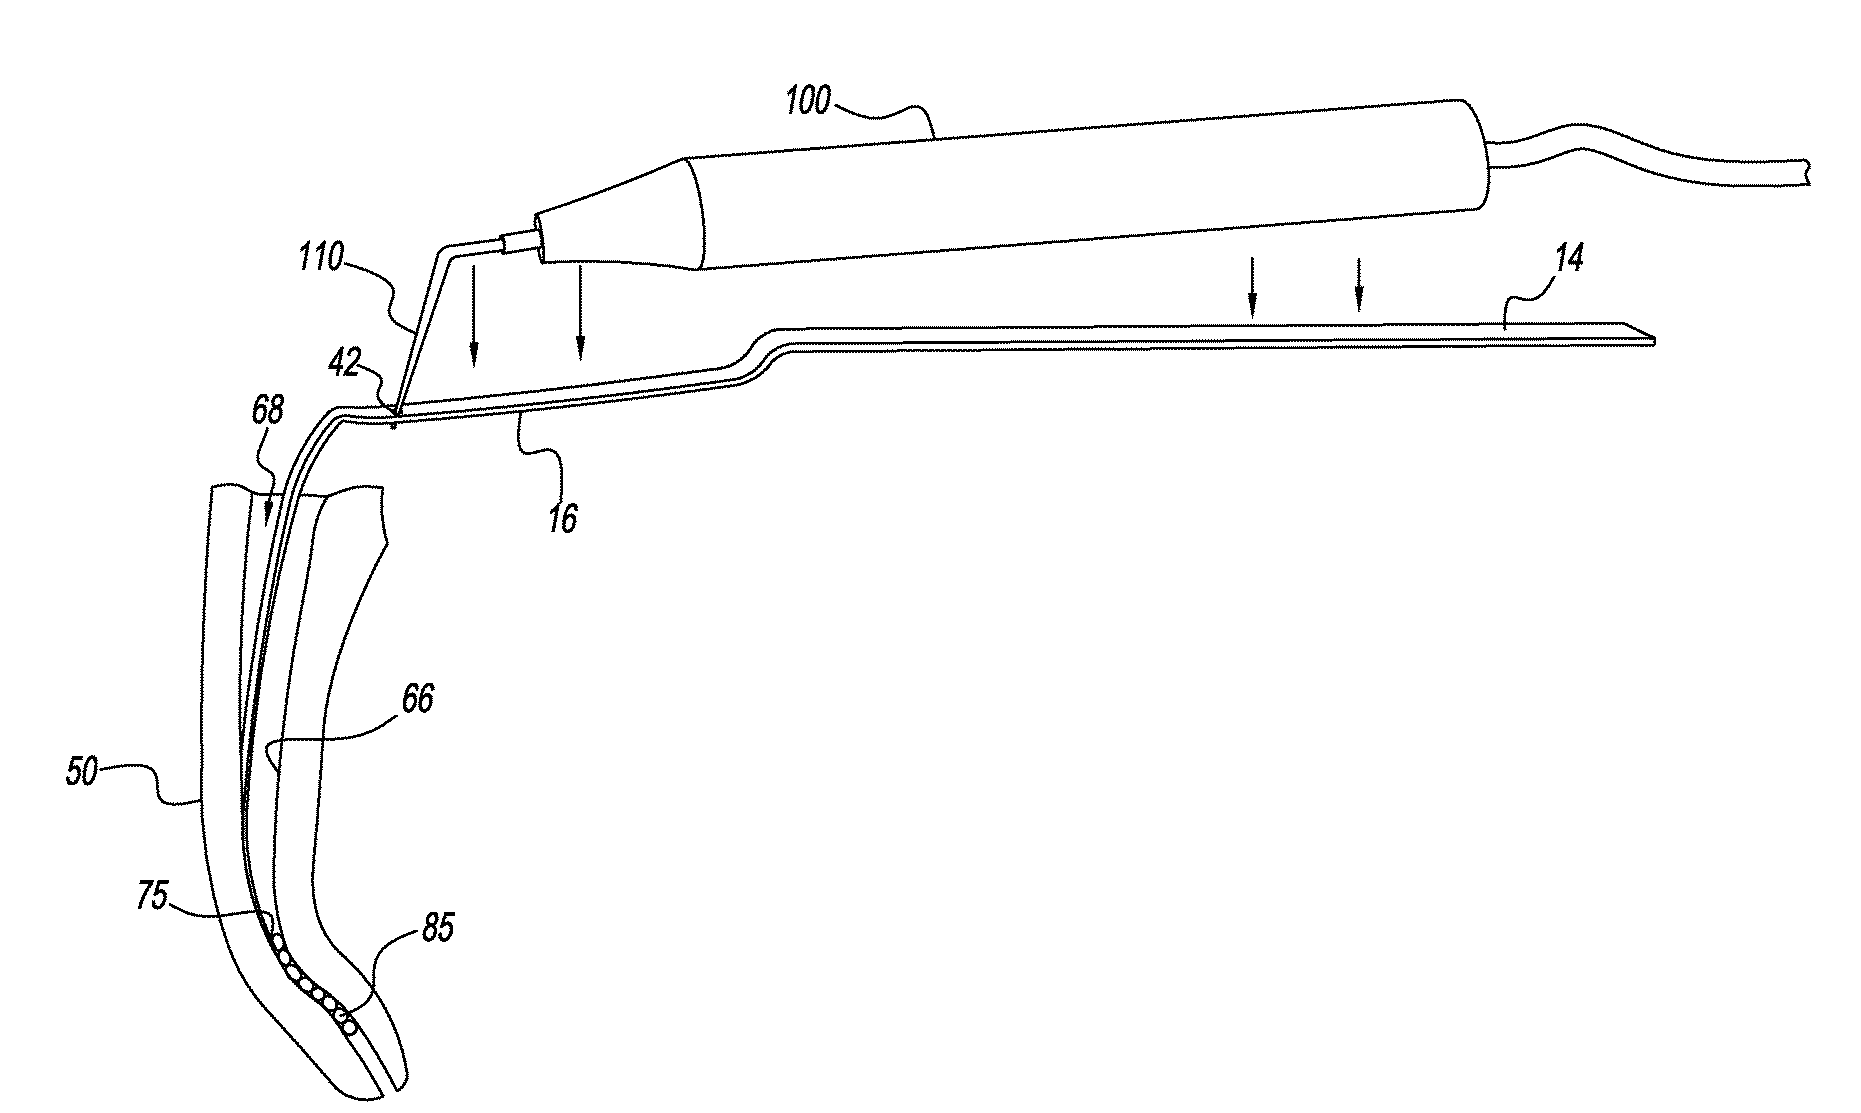 Root canal probe tool and method of removing a broken instrument fragment from a root canal